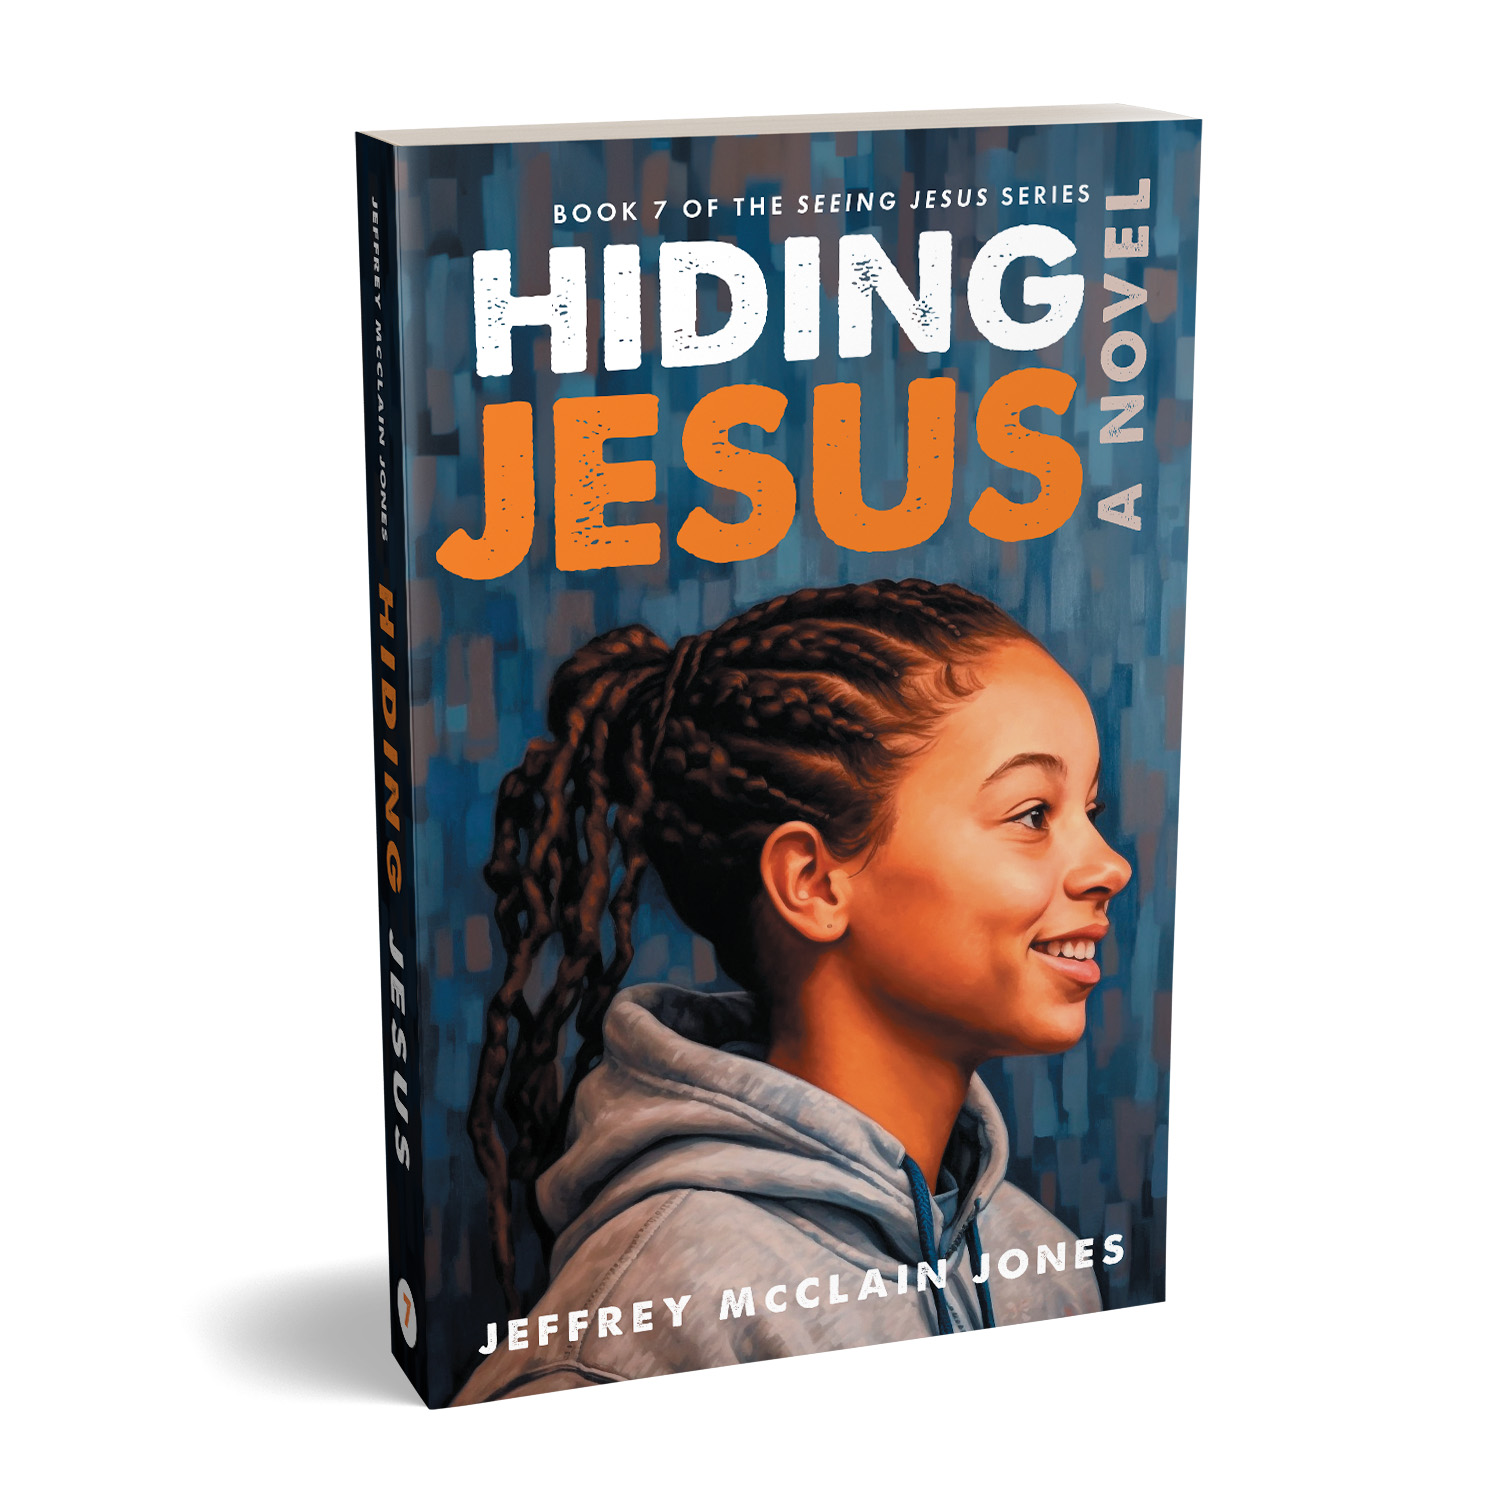 The 'Seeing Jesus' series is an ongoing collection of uplifting novels about people from all walks of life enjoying a spiritual awakening. The author is Jeffrey McClain Jones. The cover designs are by Mark Thomas of coverness.com. To find out more about my book design services, please visit www.coverness.com.